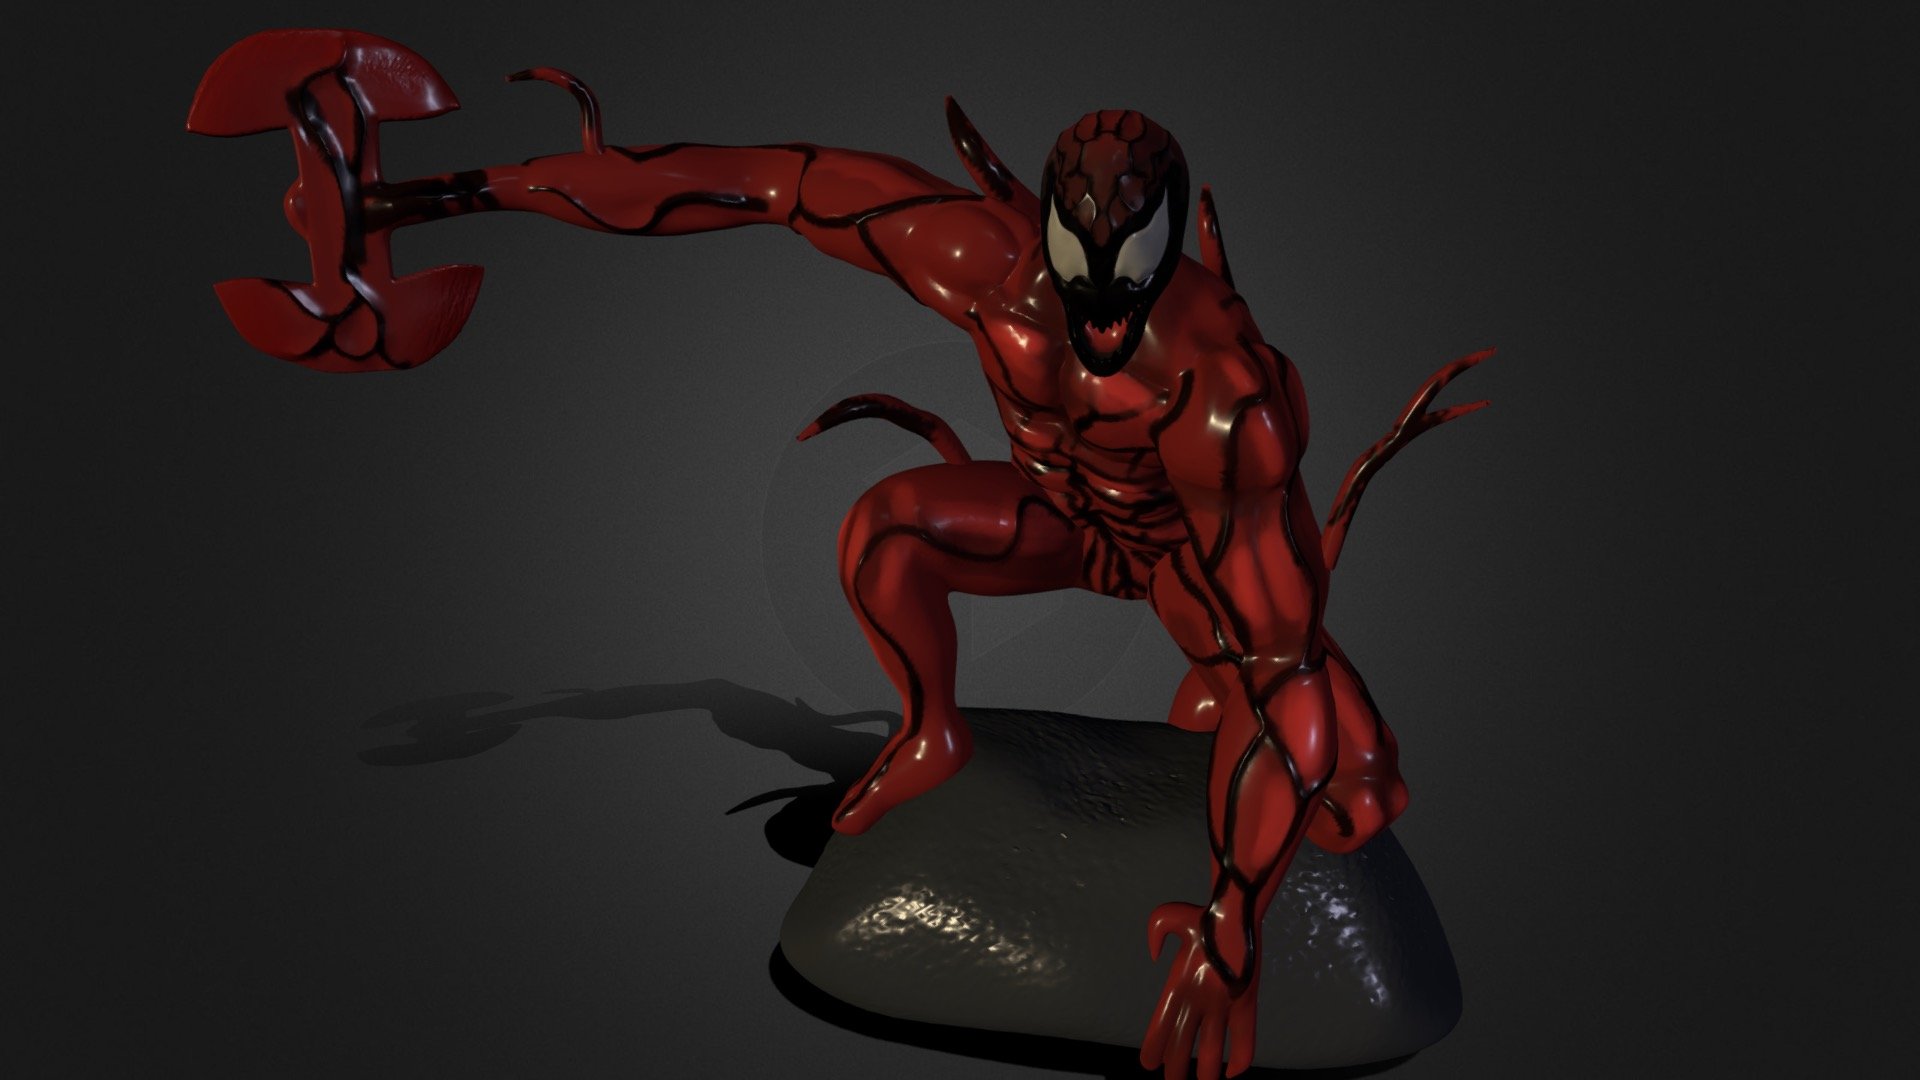 Carnage symbiote from Marvel.

Sculpted on the IPad using Nomad Sculpt 3d model